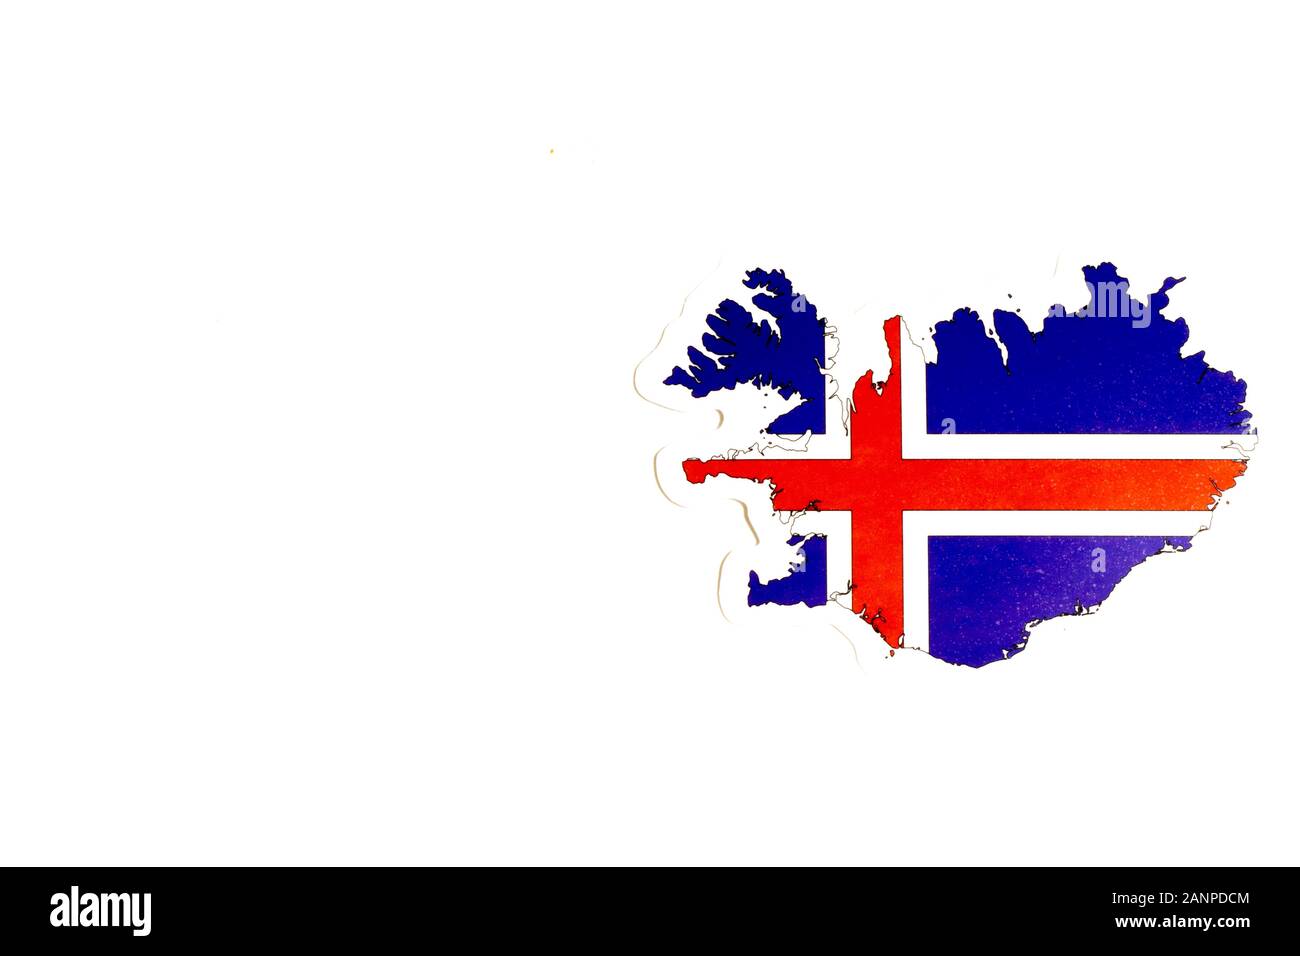 Los Angeles, California, USA - 17 January 2020: National flag of Iceland. Country outline on white background with copy space. Politics illustration Stock Photo